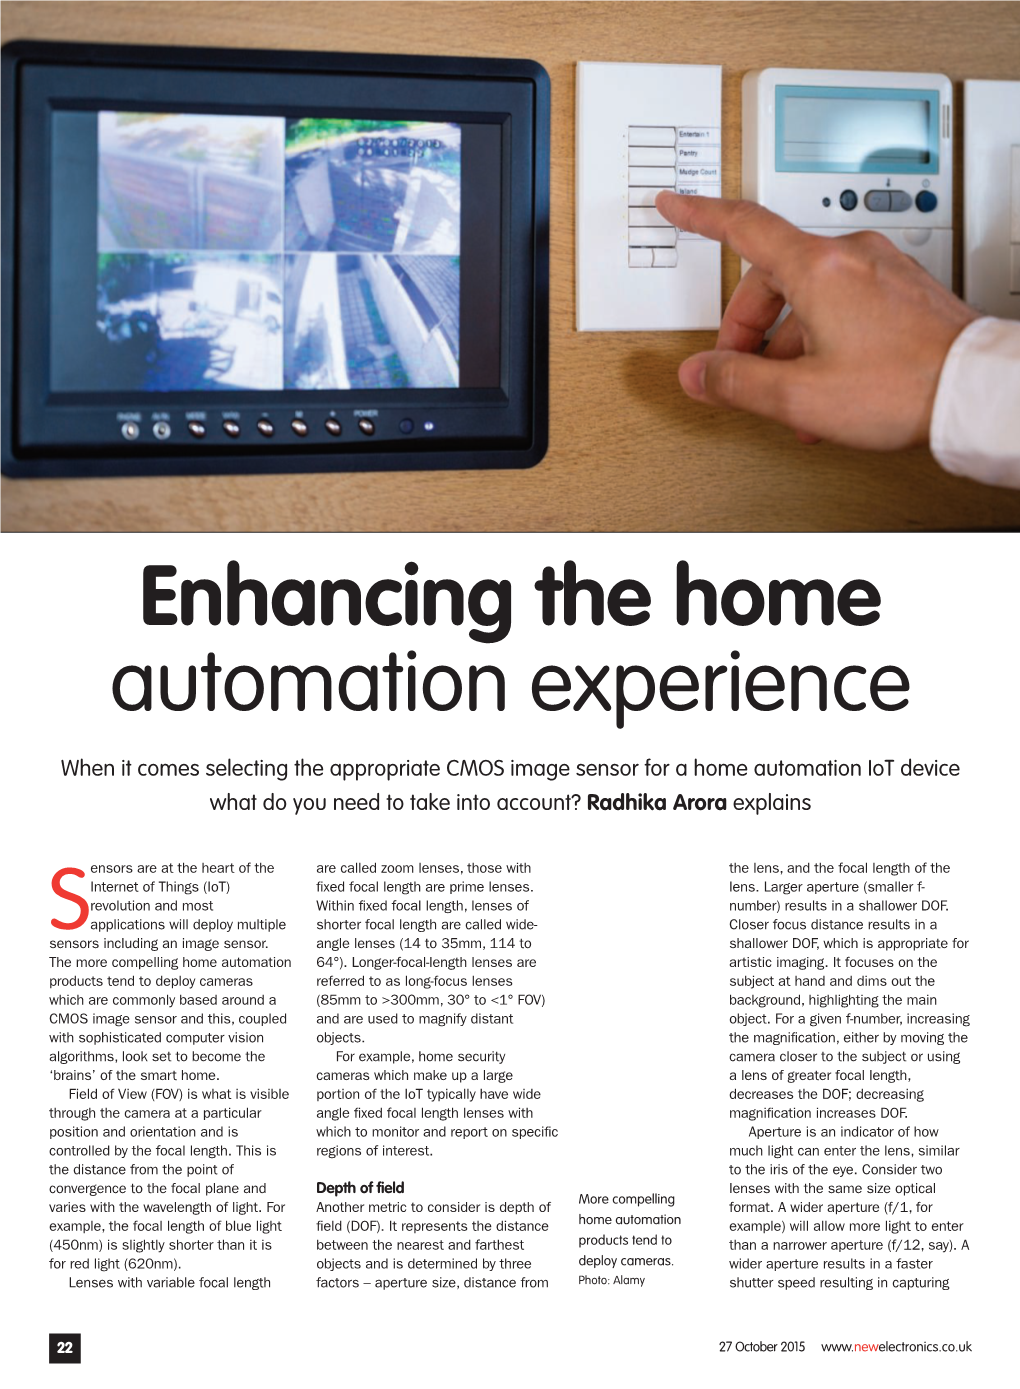 Enhancing the Home Automation Experience